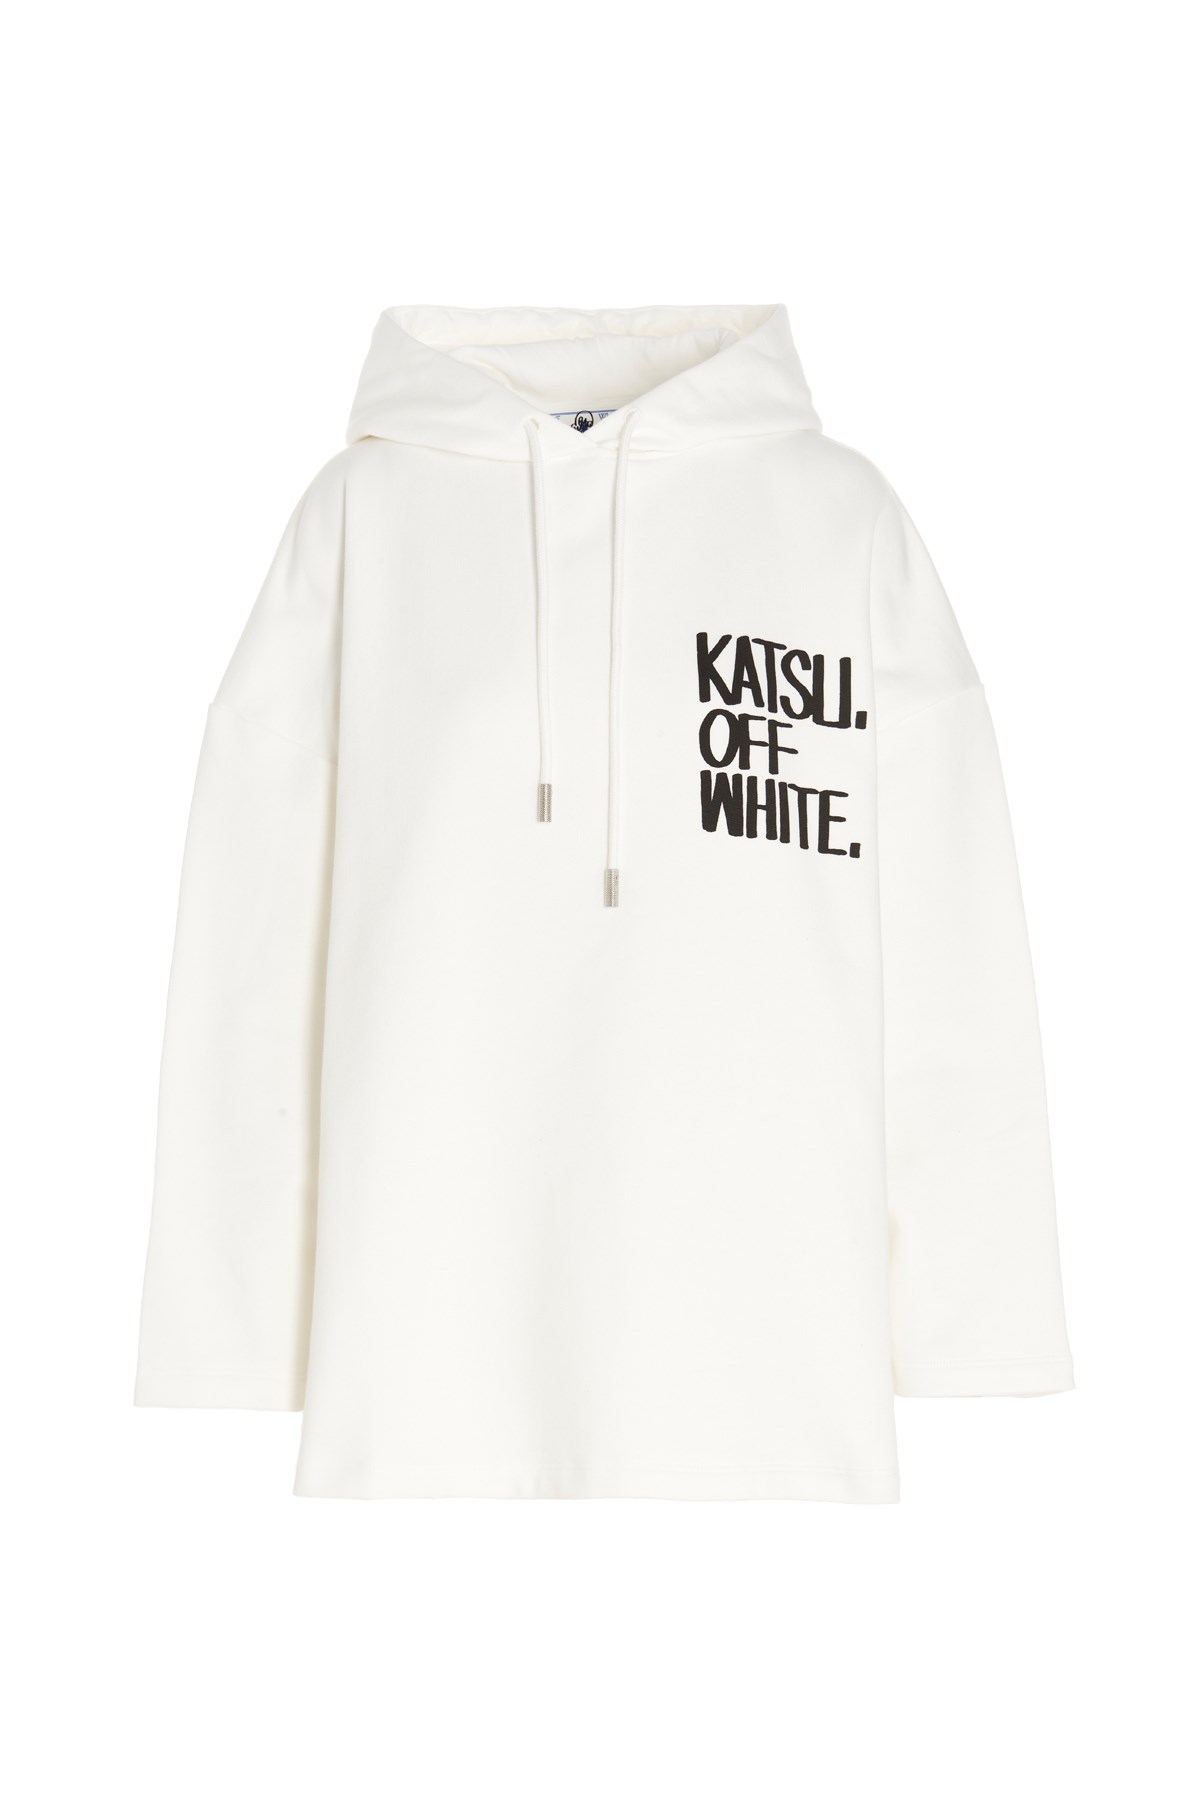 OFF-WHITE Offkat Collab. Hoodie